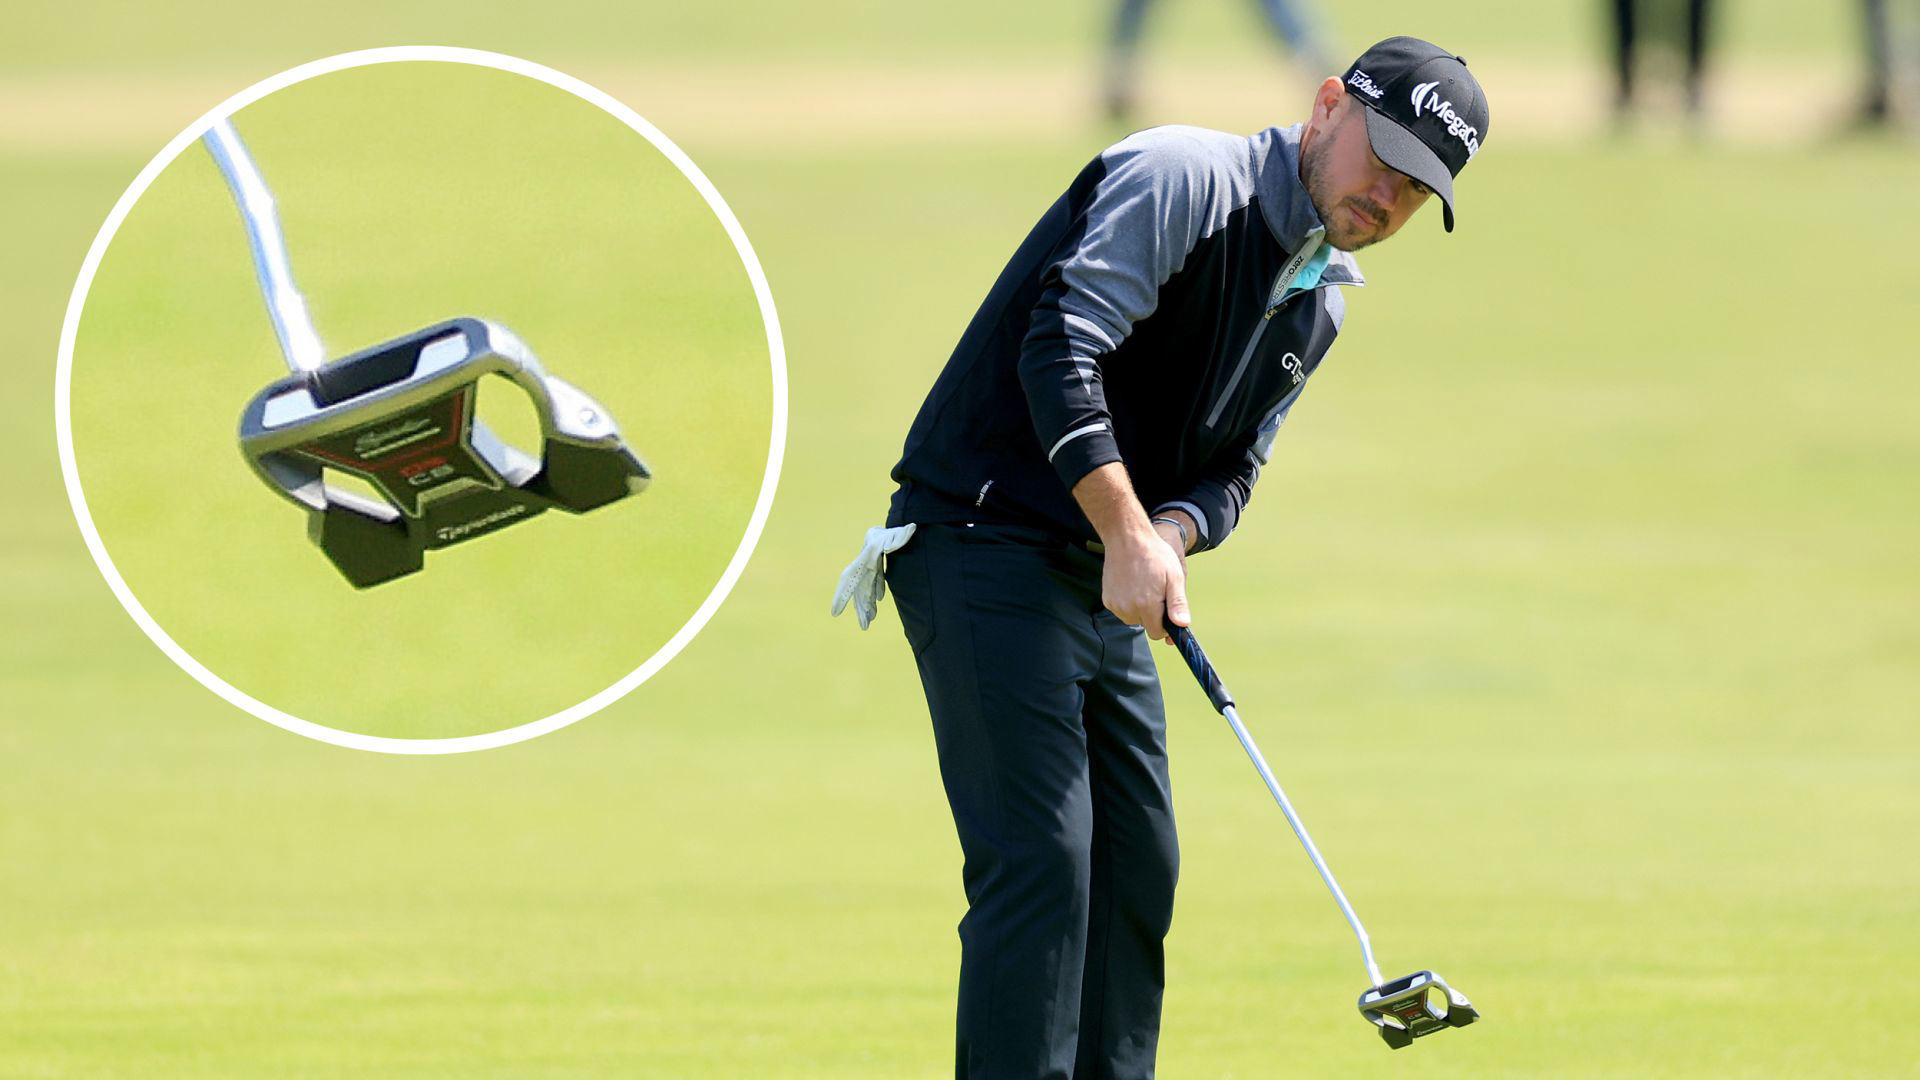 What Putter Does Brian Harman Use?